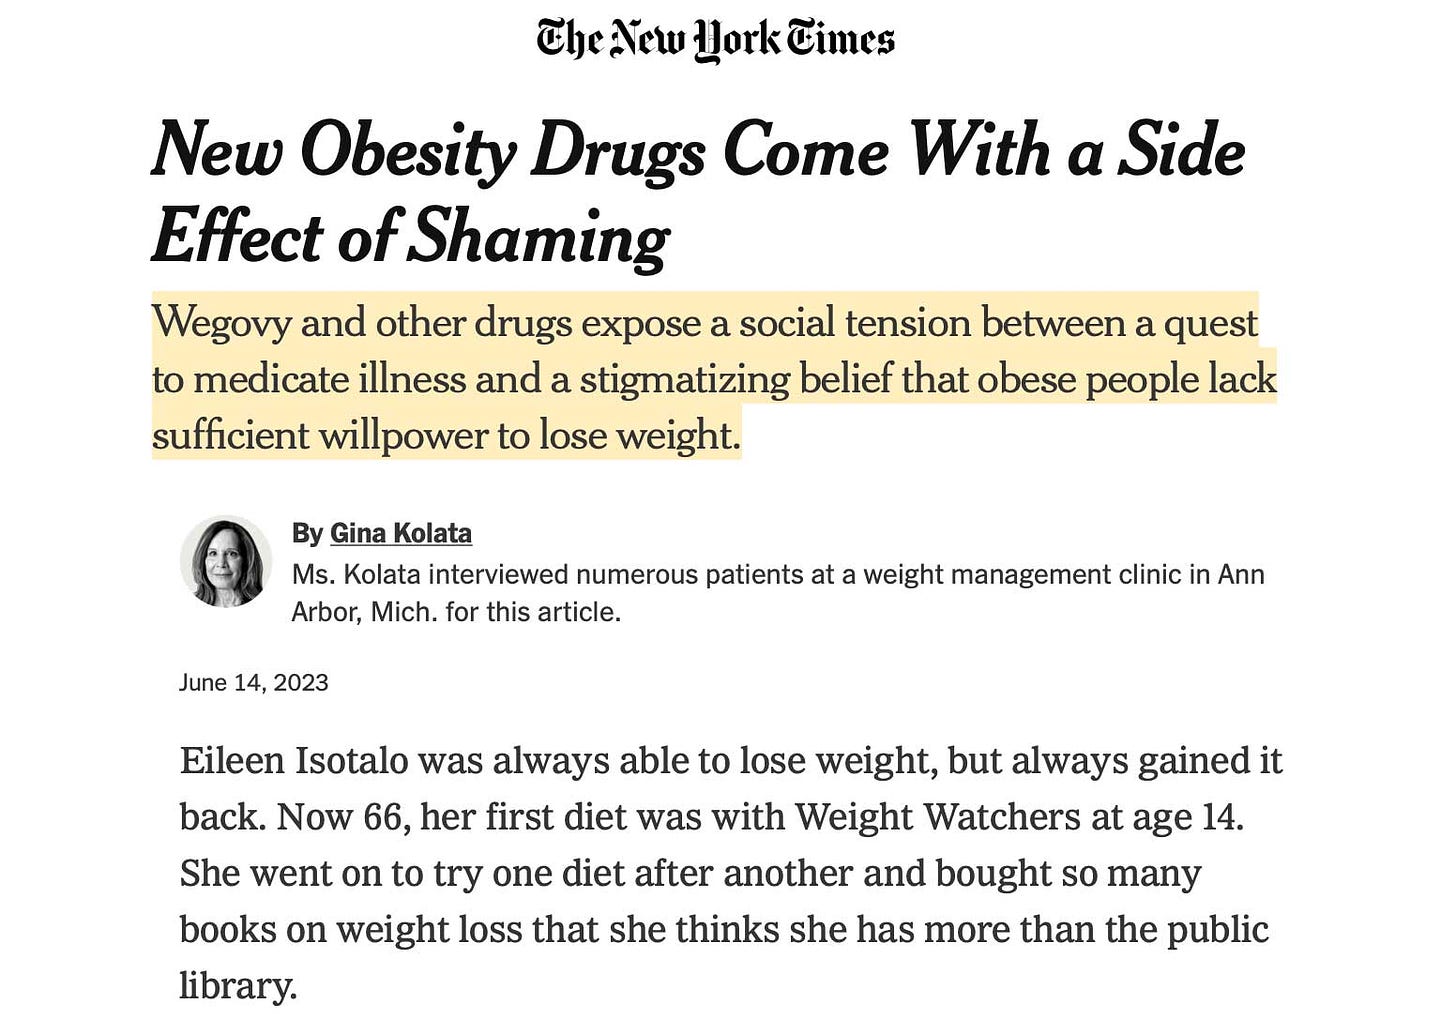 Weight loss drugs come with a side of shame - New York Times article